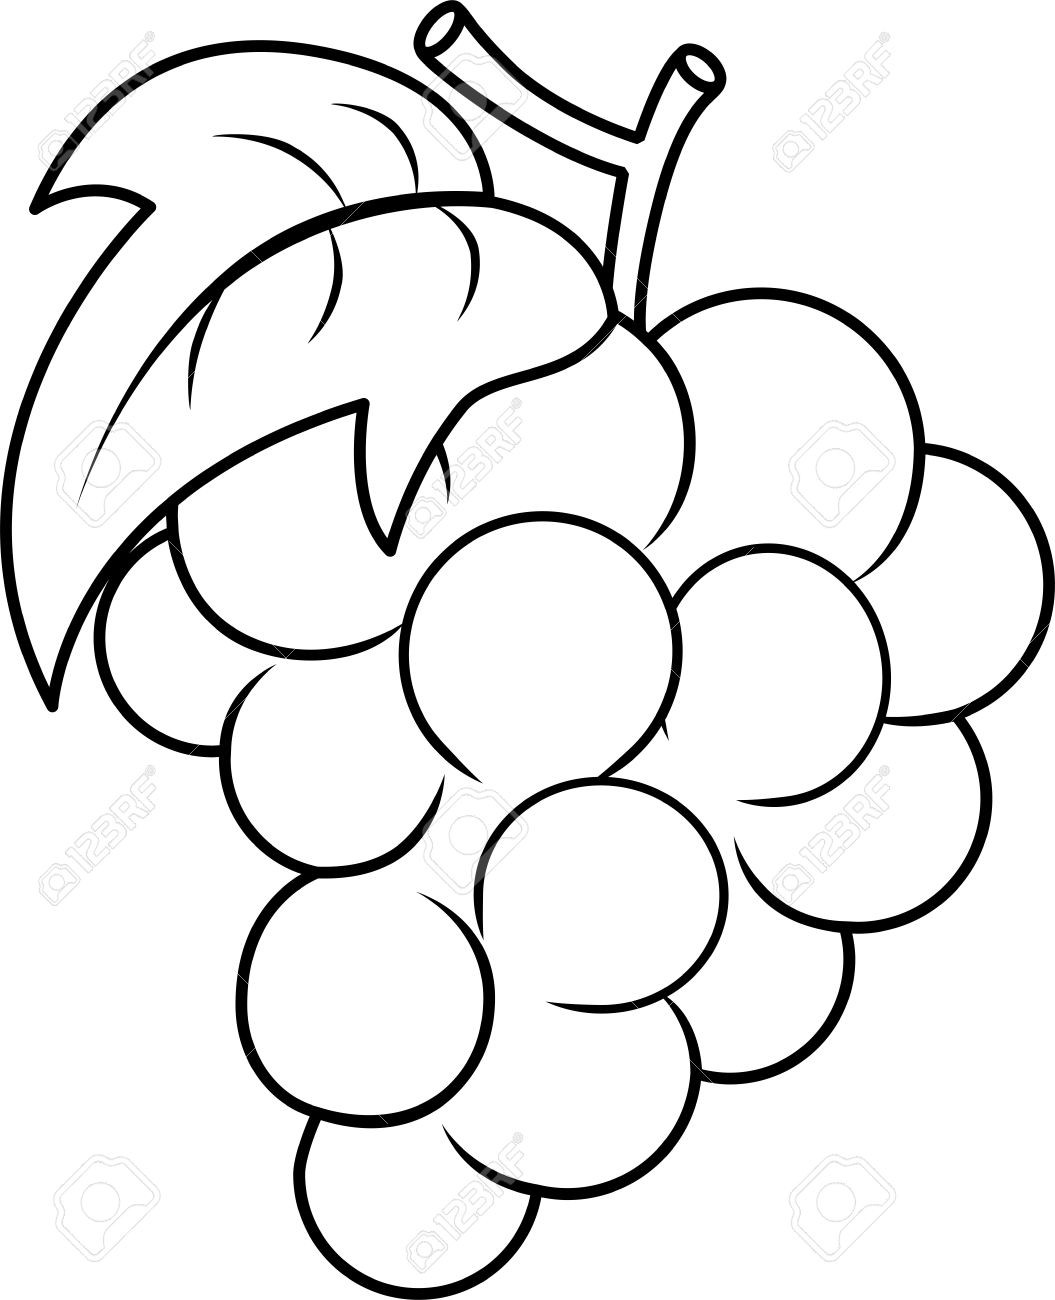 Grapes Coloring Pages
 Grapes clipart outline Pencil and in color grapes